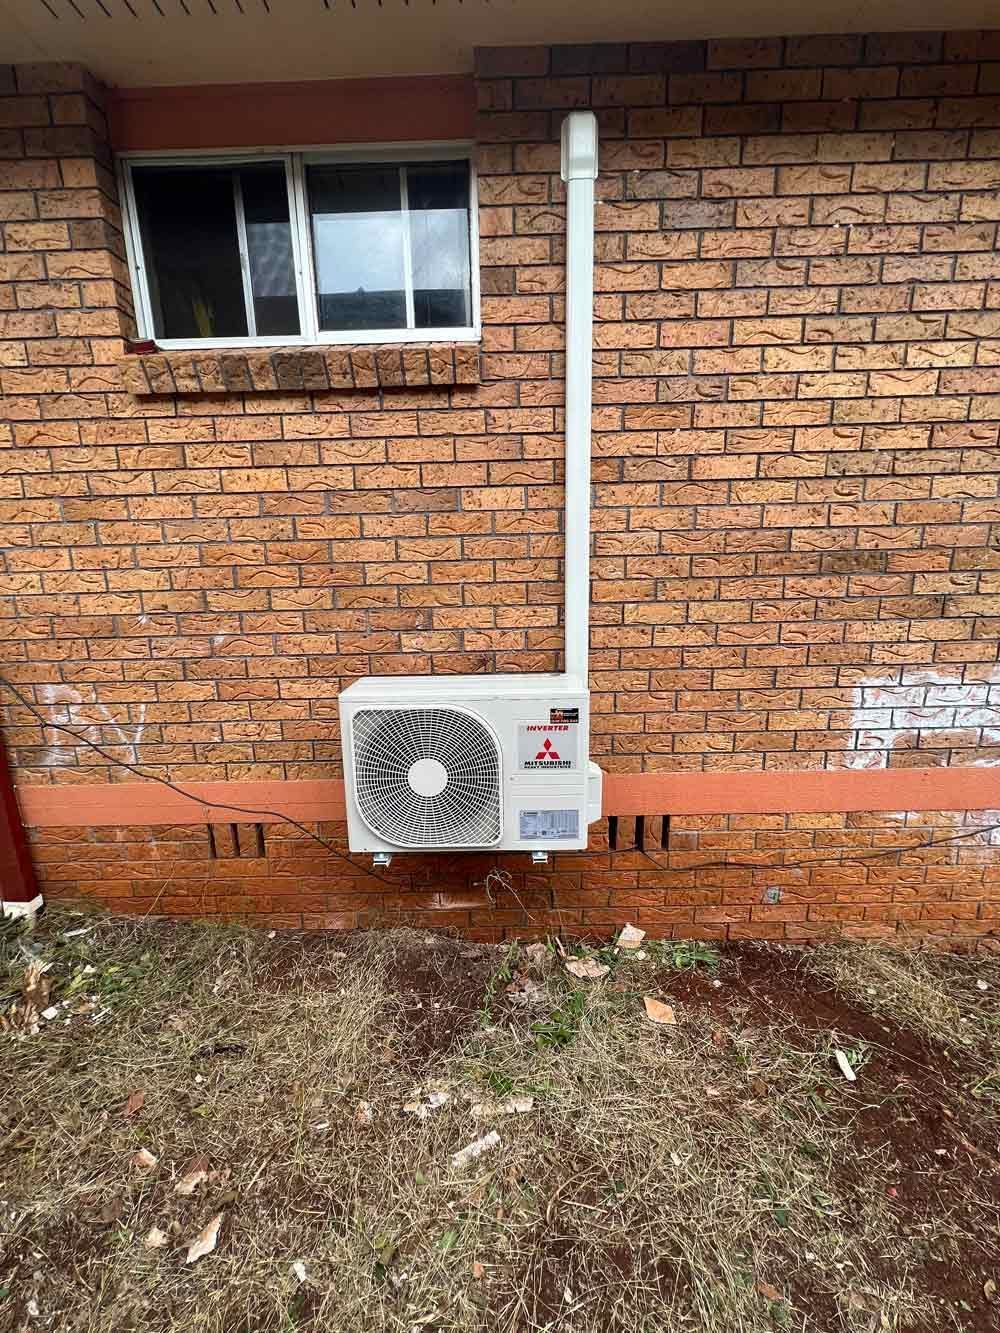 A Compressor Hanging on the Brick Wall — Electrician in Inverell, NSW